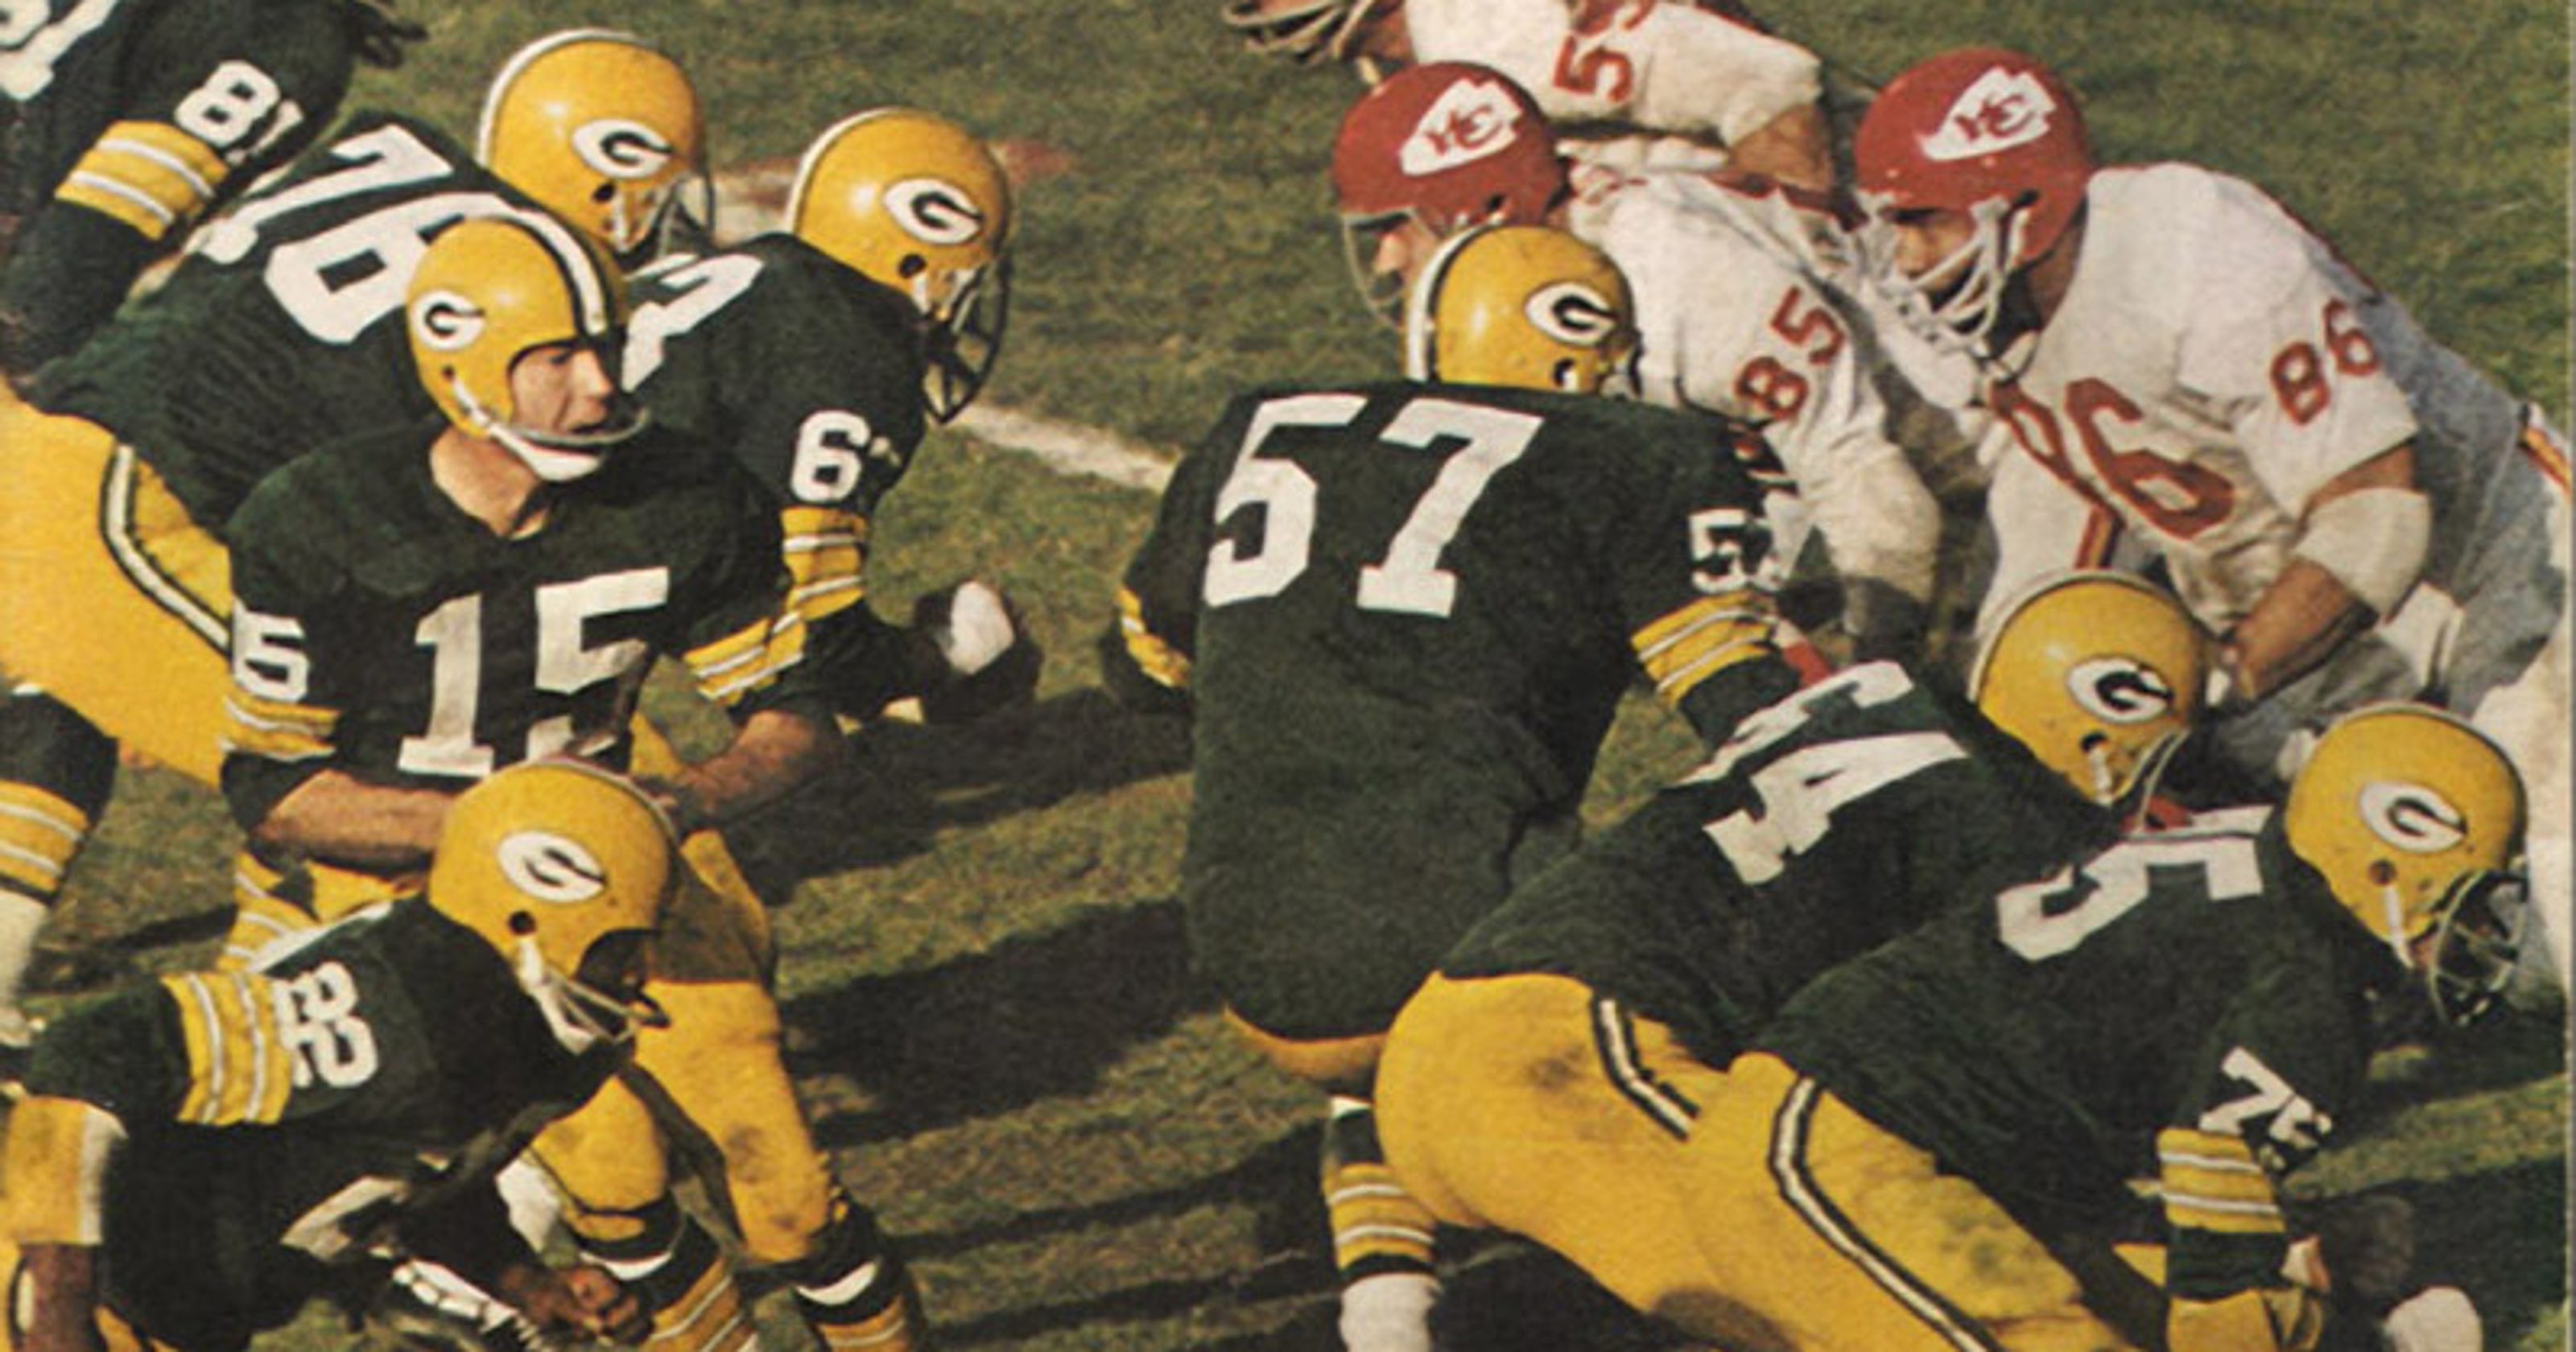 Jan 15 1967: Packers beat Chiefs to win Super Bowl I